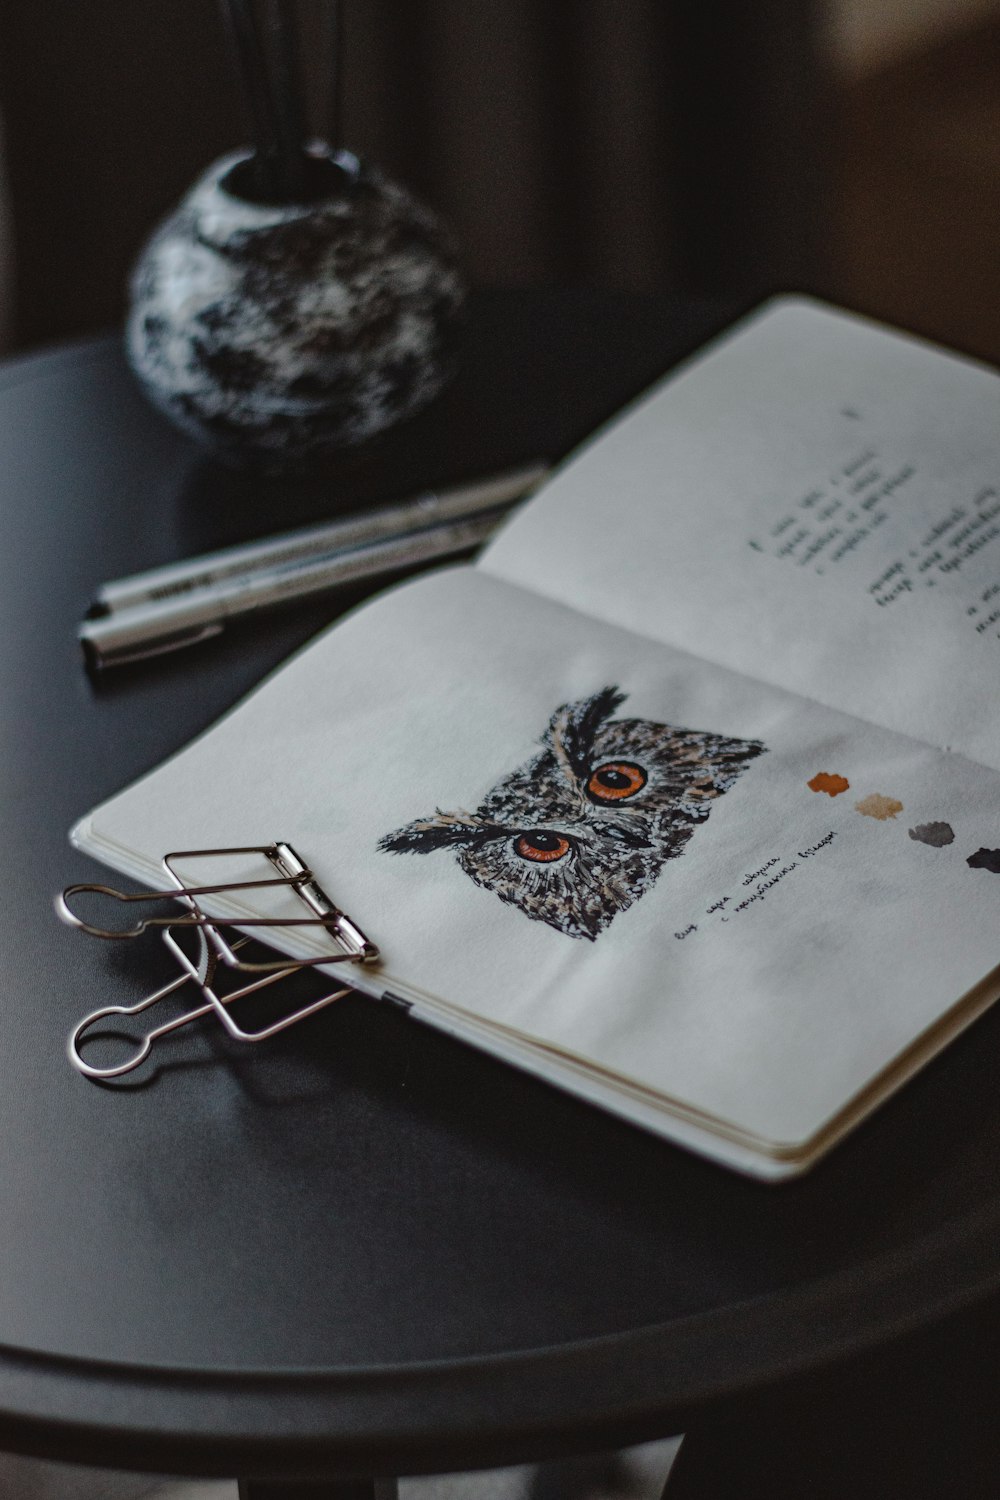 a drawing of a bird on a book